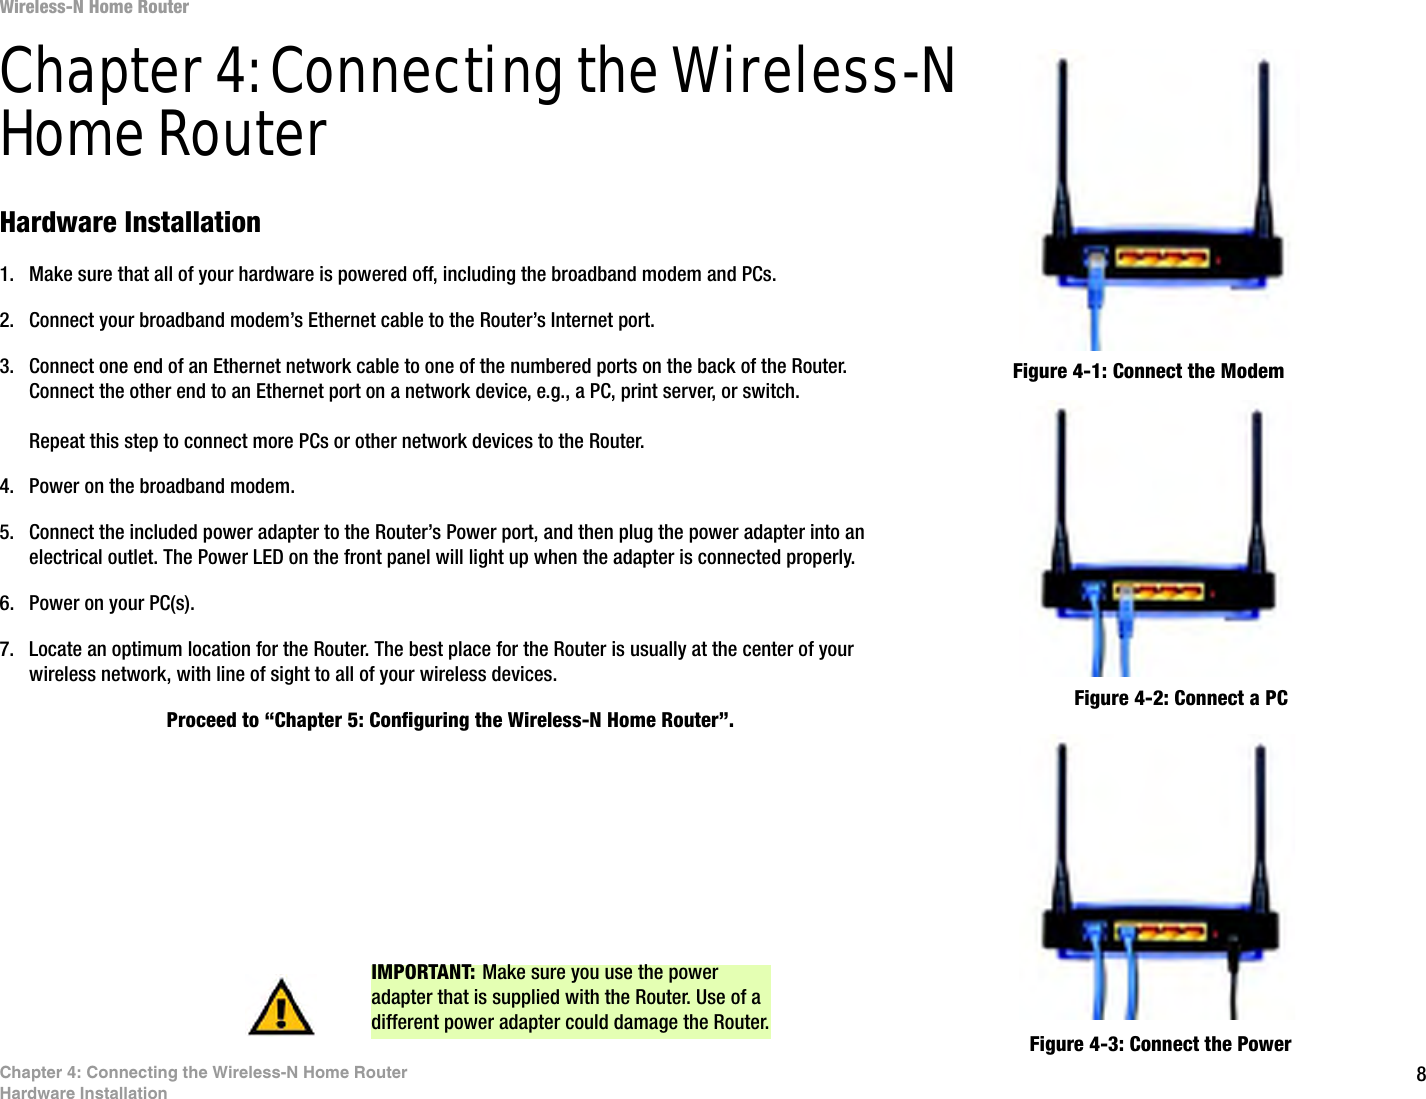 8Chapter 4: Connecting the Wireless-N Home RouterHardware InstallationWireless-N Home RouterChapter 4: Connecting the Wireless-N Home RouterHardware Installation1. Make sure that all of your hardware is powered off, including the broadband modem and PCs.2. Connect your broadband modem’s Ethernet cable to the Router’s Internet port.3. Connect one end of an Ethernet network cable to one of the numbered ports on the back of the Router. Connect the other end to an Ethernet port on a network device, e.g., a PC, print server, or switch.Repeat this step to connect more PCs or other network devices to the Router.4. Power on the broadband modem.5. Connect the included power adapter to the Router’s Power port, and then plug the power adapter into an electrical outlet. The Power LED on the front panel will light up when the adapter is connected properly.6. Power on your PC(s).7. Locate an optimum location for the Router. The best place for the Router is usually at the center of your wireless network, with line of sight to all of your wireless devices.Proceed to “Chapter 5: Configuring the Wireless-N Home Router”.Figure 4-1: Connect the ModemFigure 4-2: Connect a PCFigure 4-3: Connect the PowerIMPORTANT: Make sure you use the power adapter that is supplied with the Router. Use of a different power adapter could damage the Router.